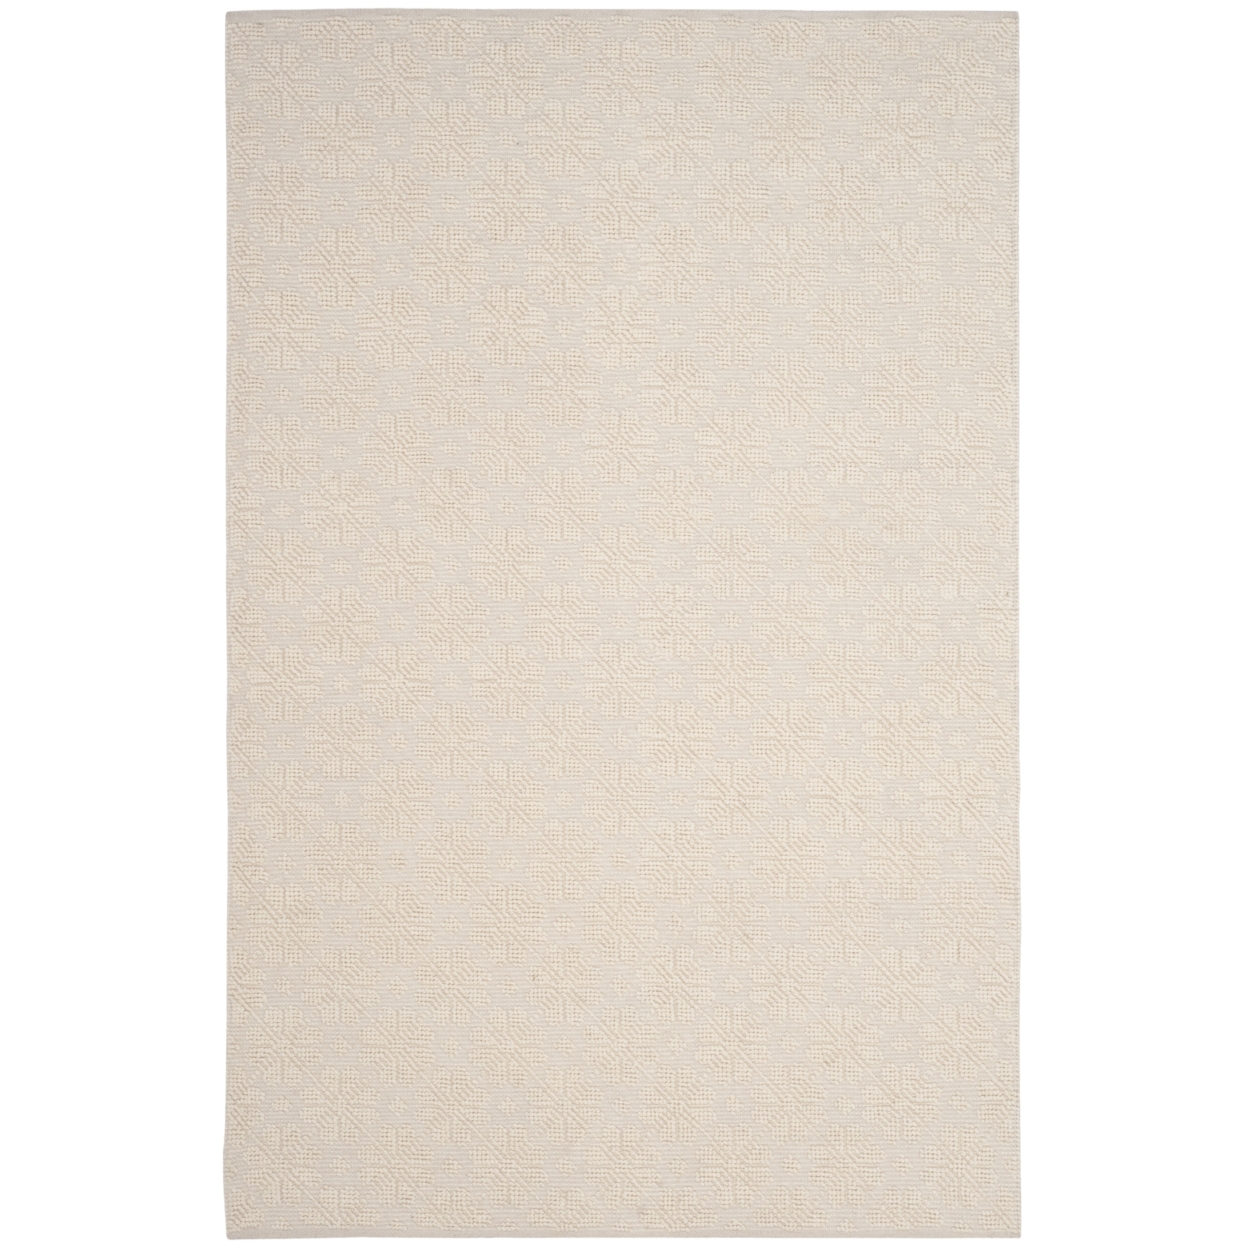 SAFAVIEH Vermont Collection VRM106A Handwoven Ivory Rug - 4 X 6